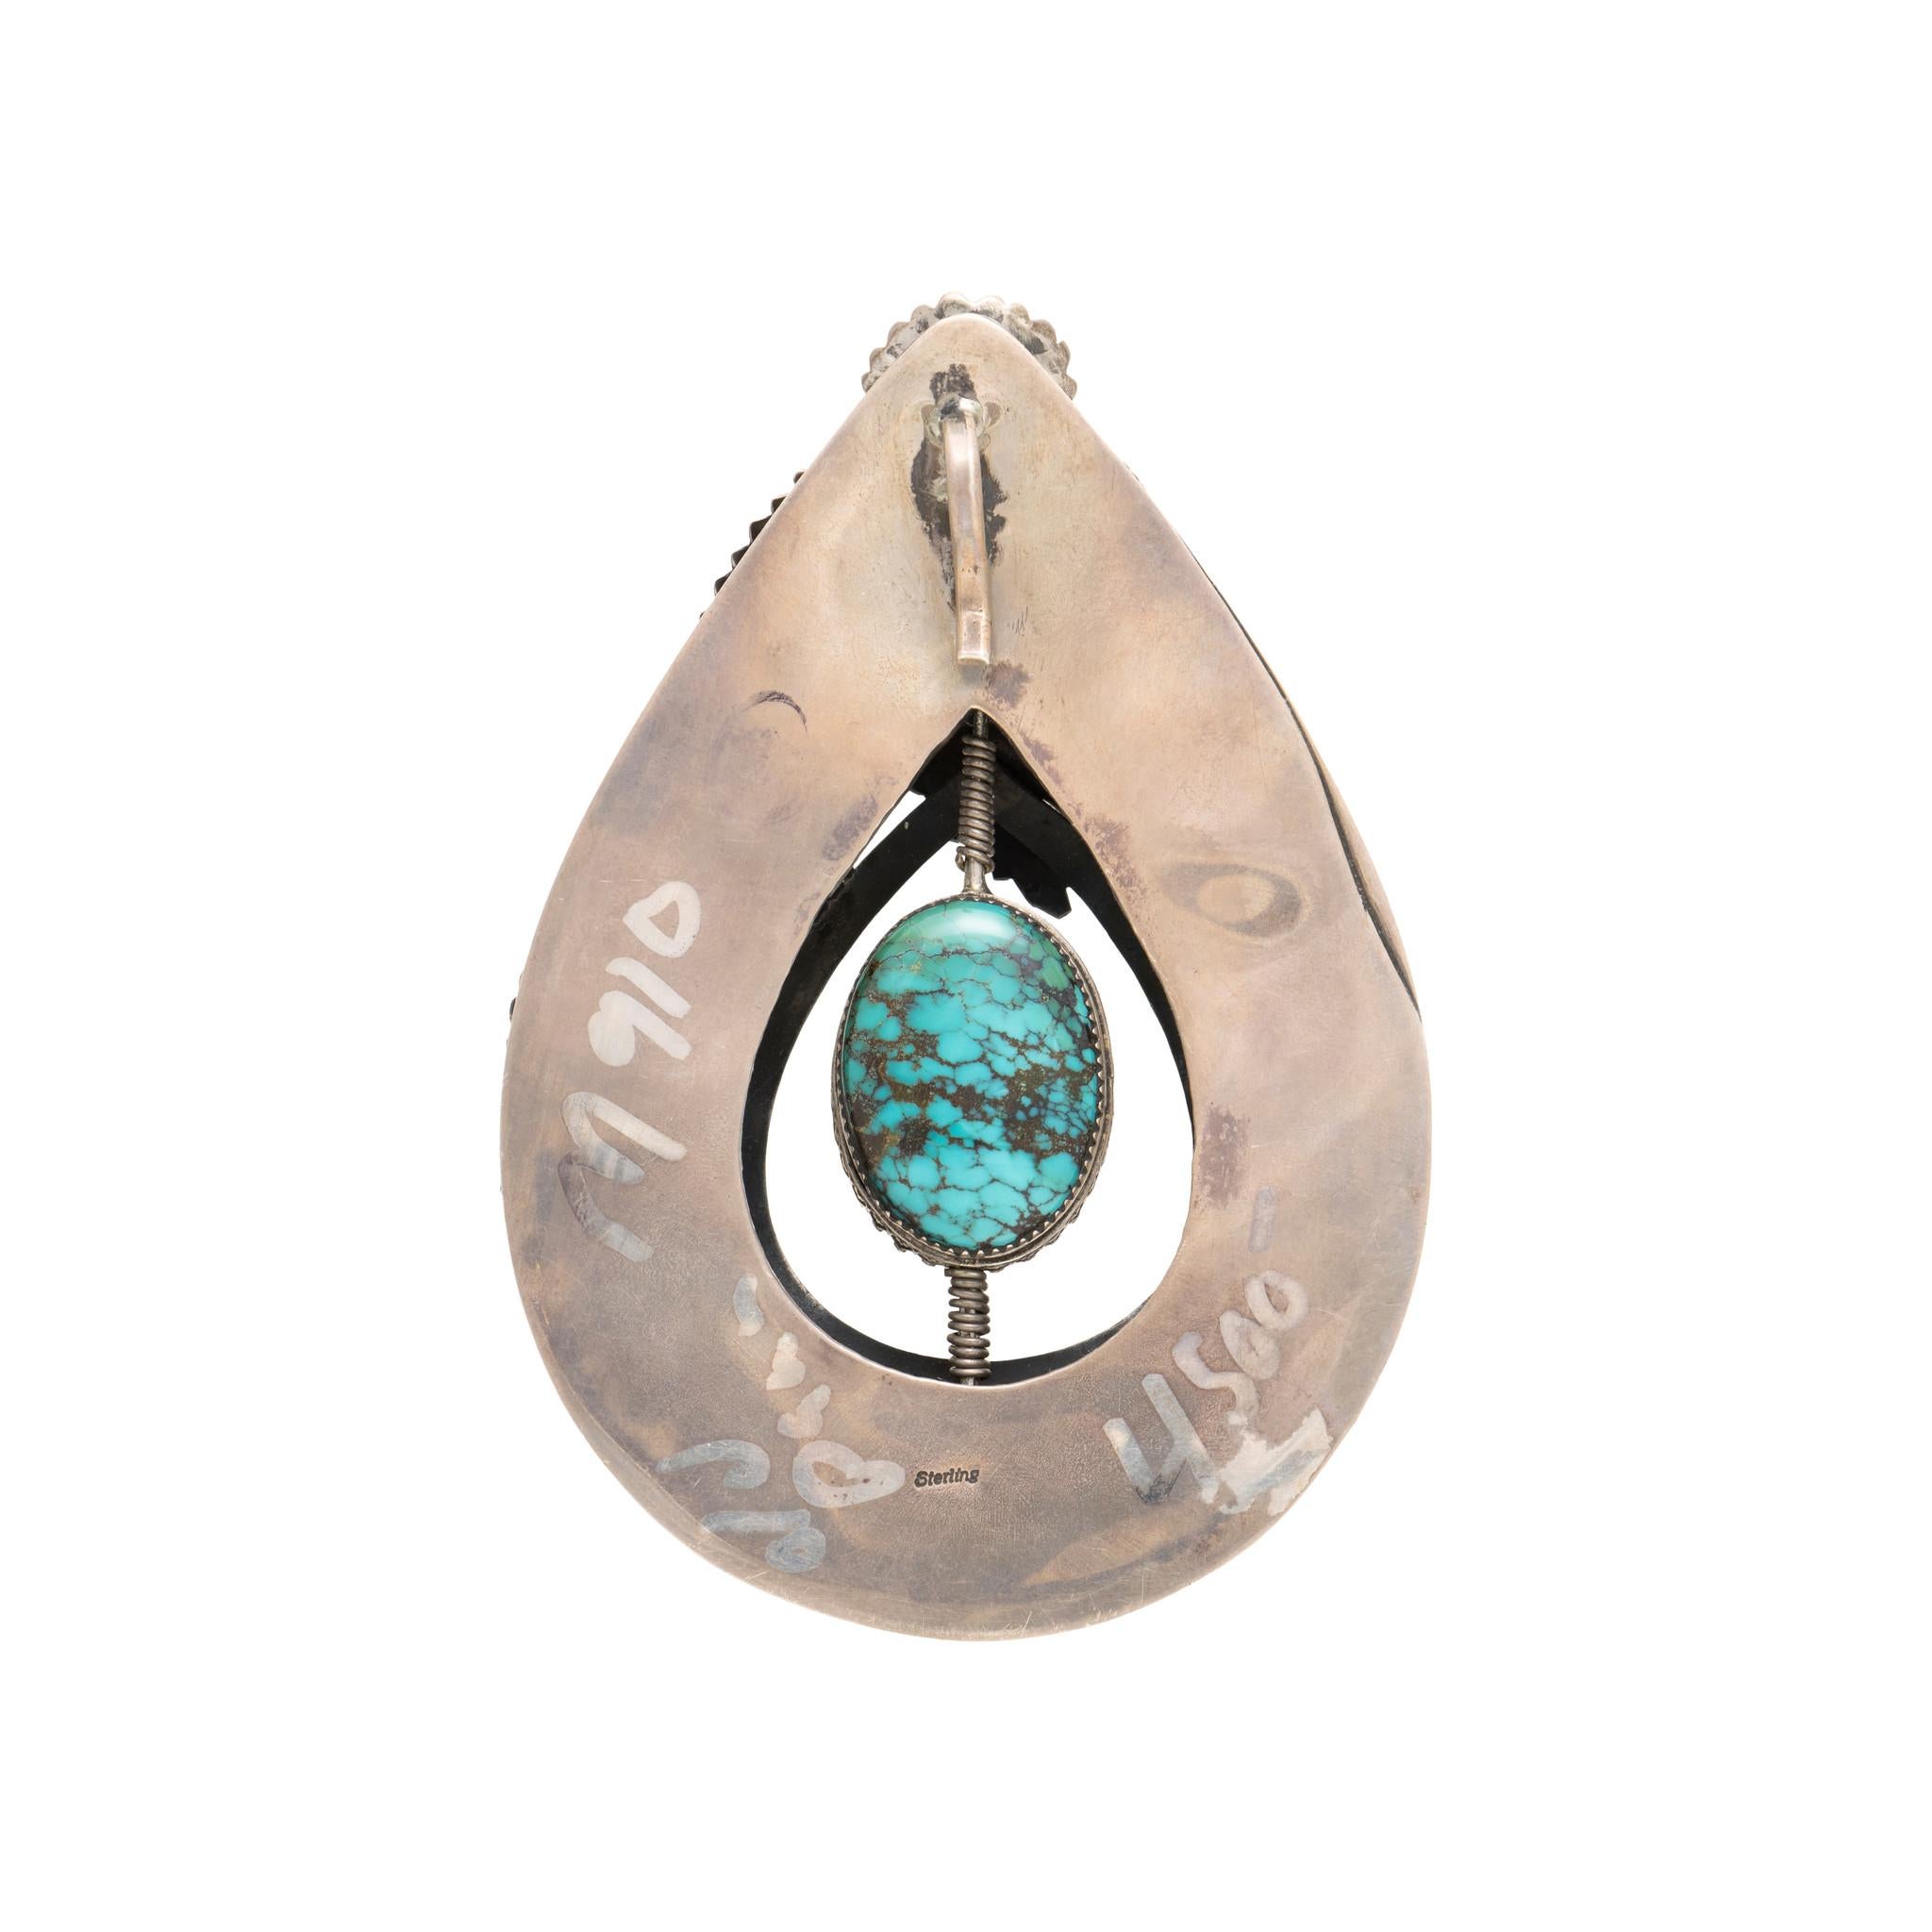 Large Native American Navajo Indian highly detailed sterling silver pendant with rotating Kingman turquoise center stone. Stone is floating in pendant with ornate and intricate sterling details of leaves, hand stamped palmettes, flowers and twisted